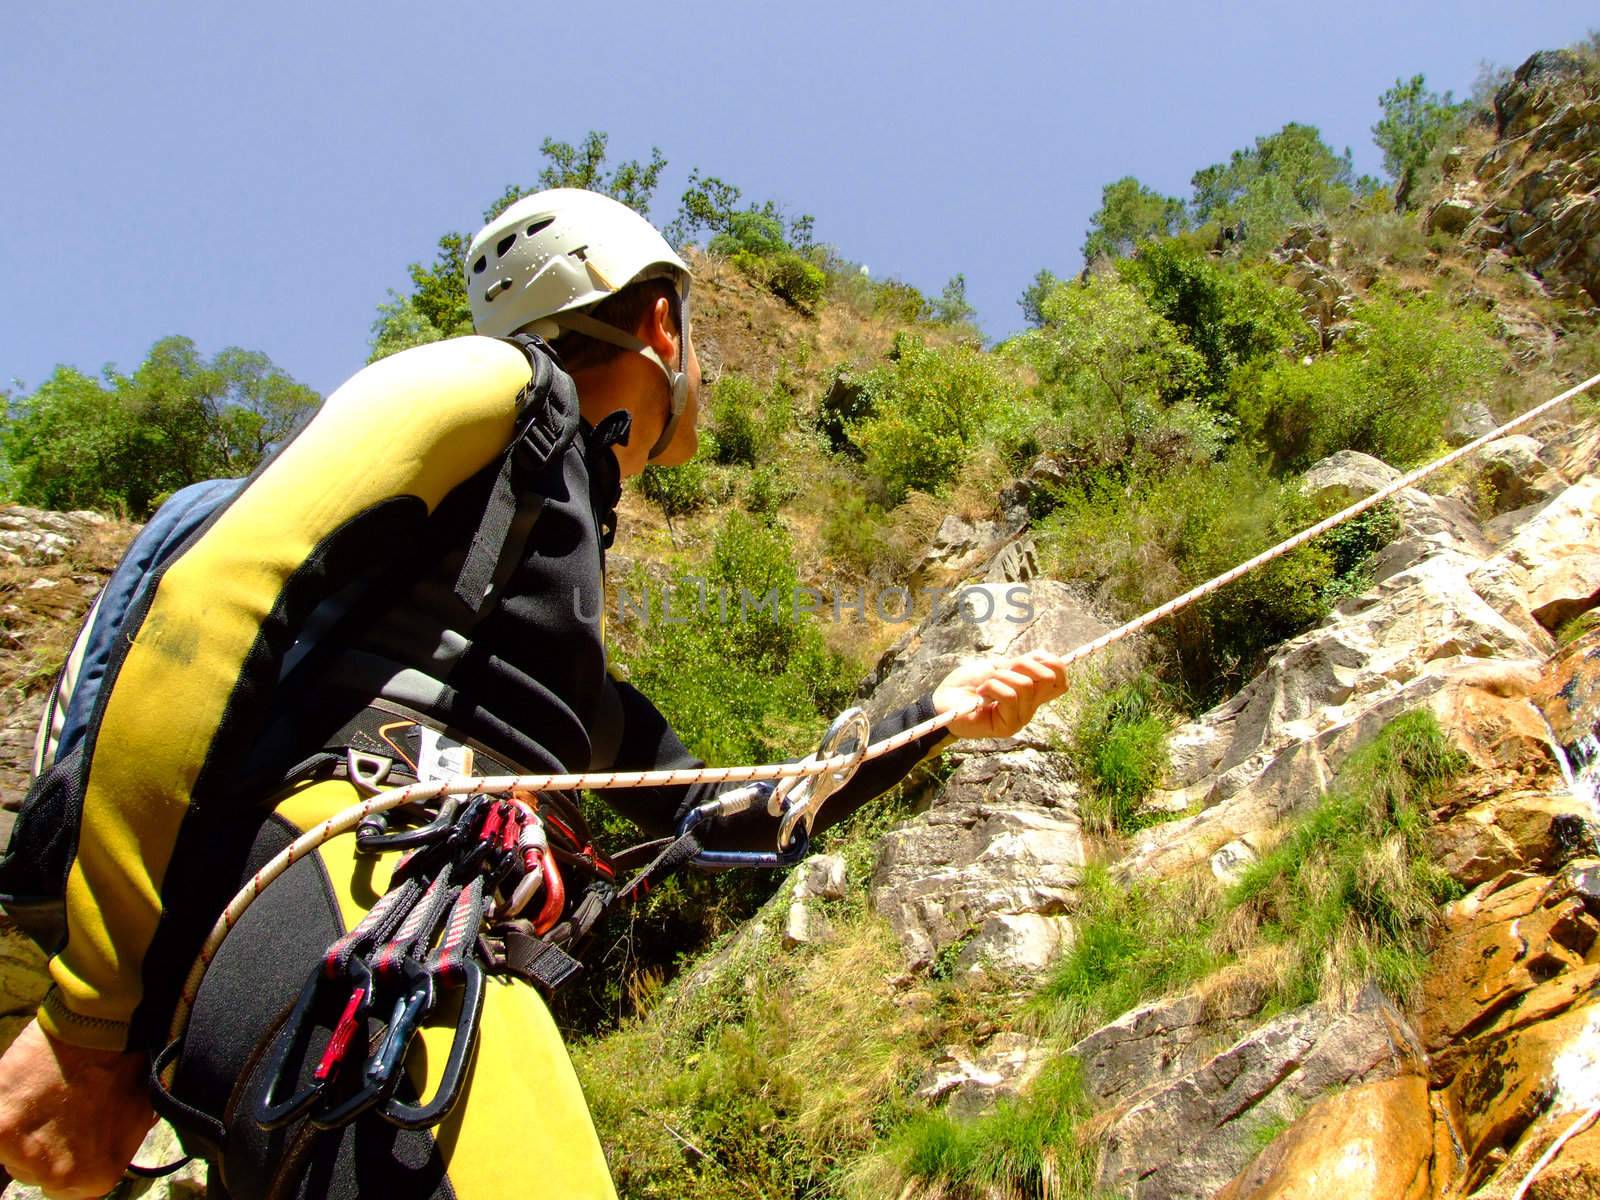 Canyoning on the Teixeira river in Portugal